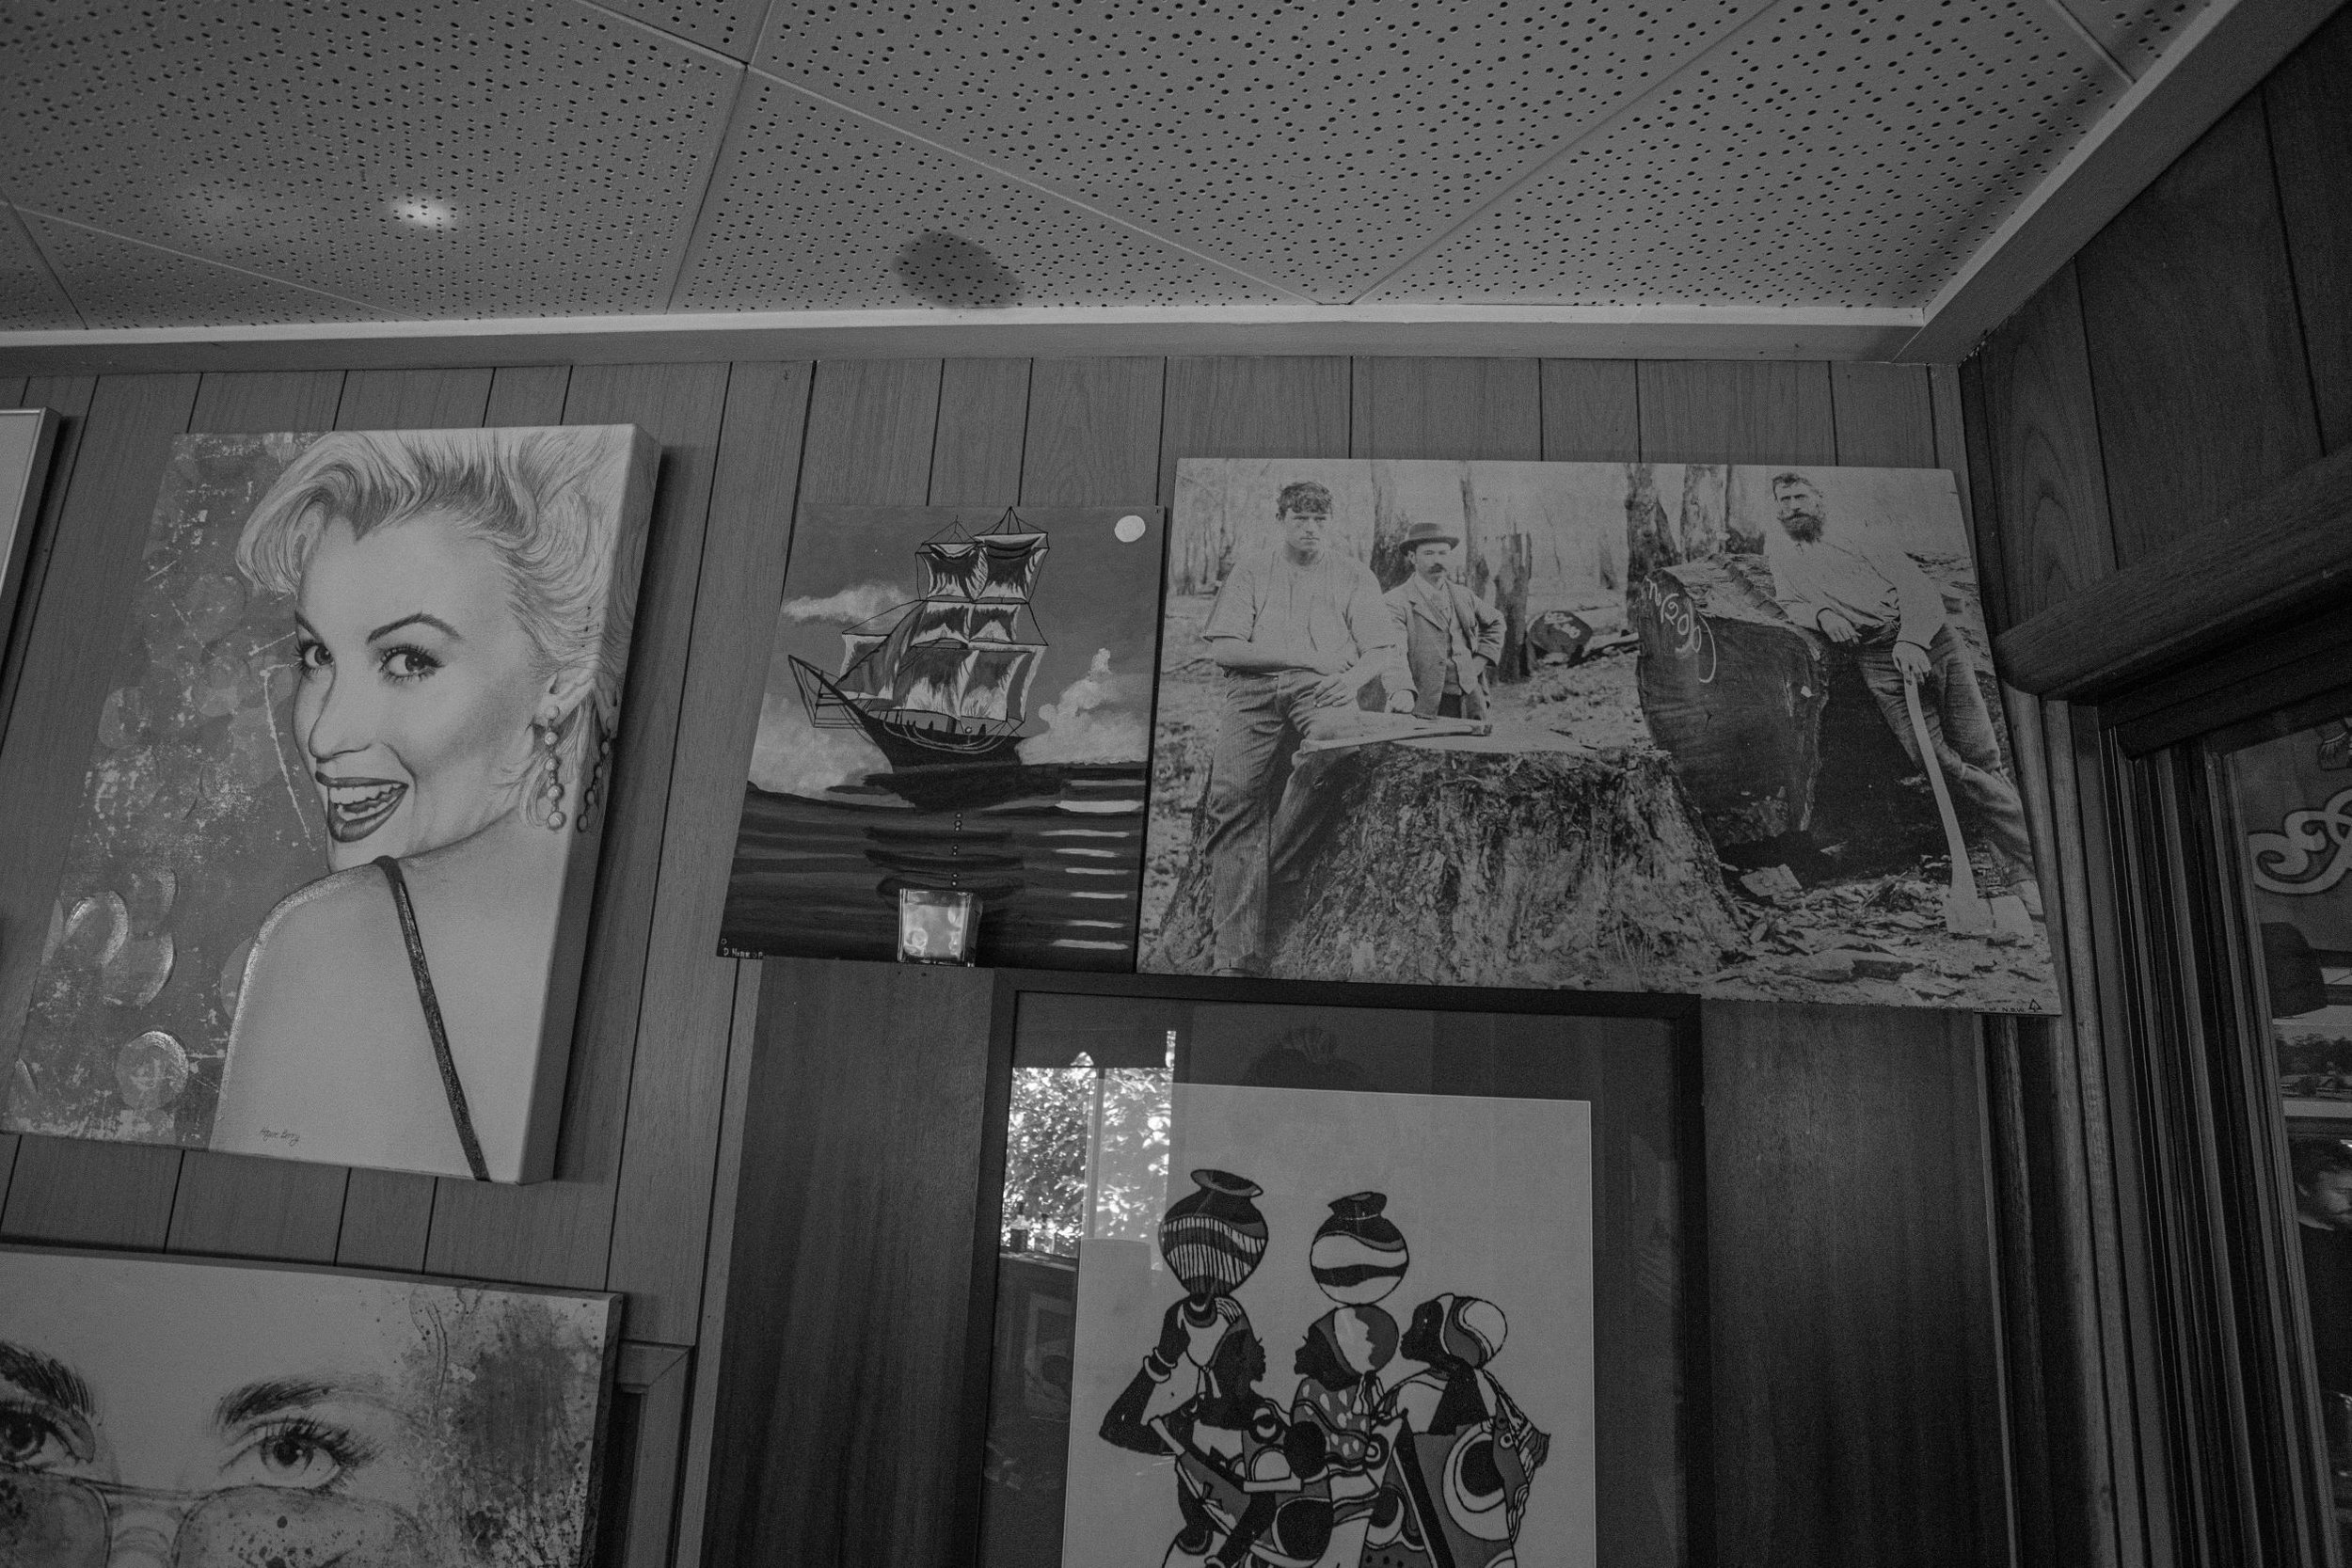  Bell Bird Hotel with an image of loggers next to Marilyn Monroe from the 1900’s. 